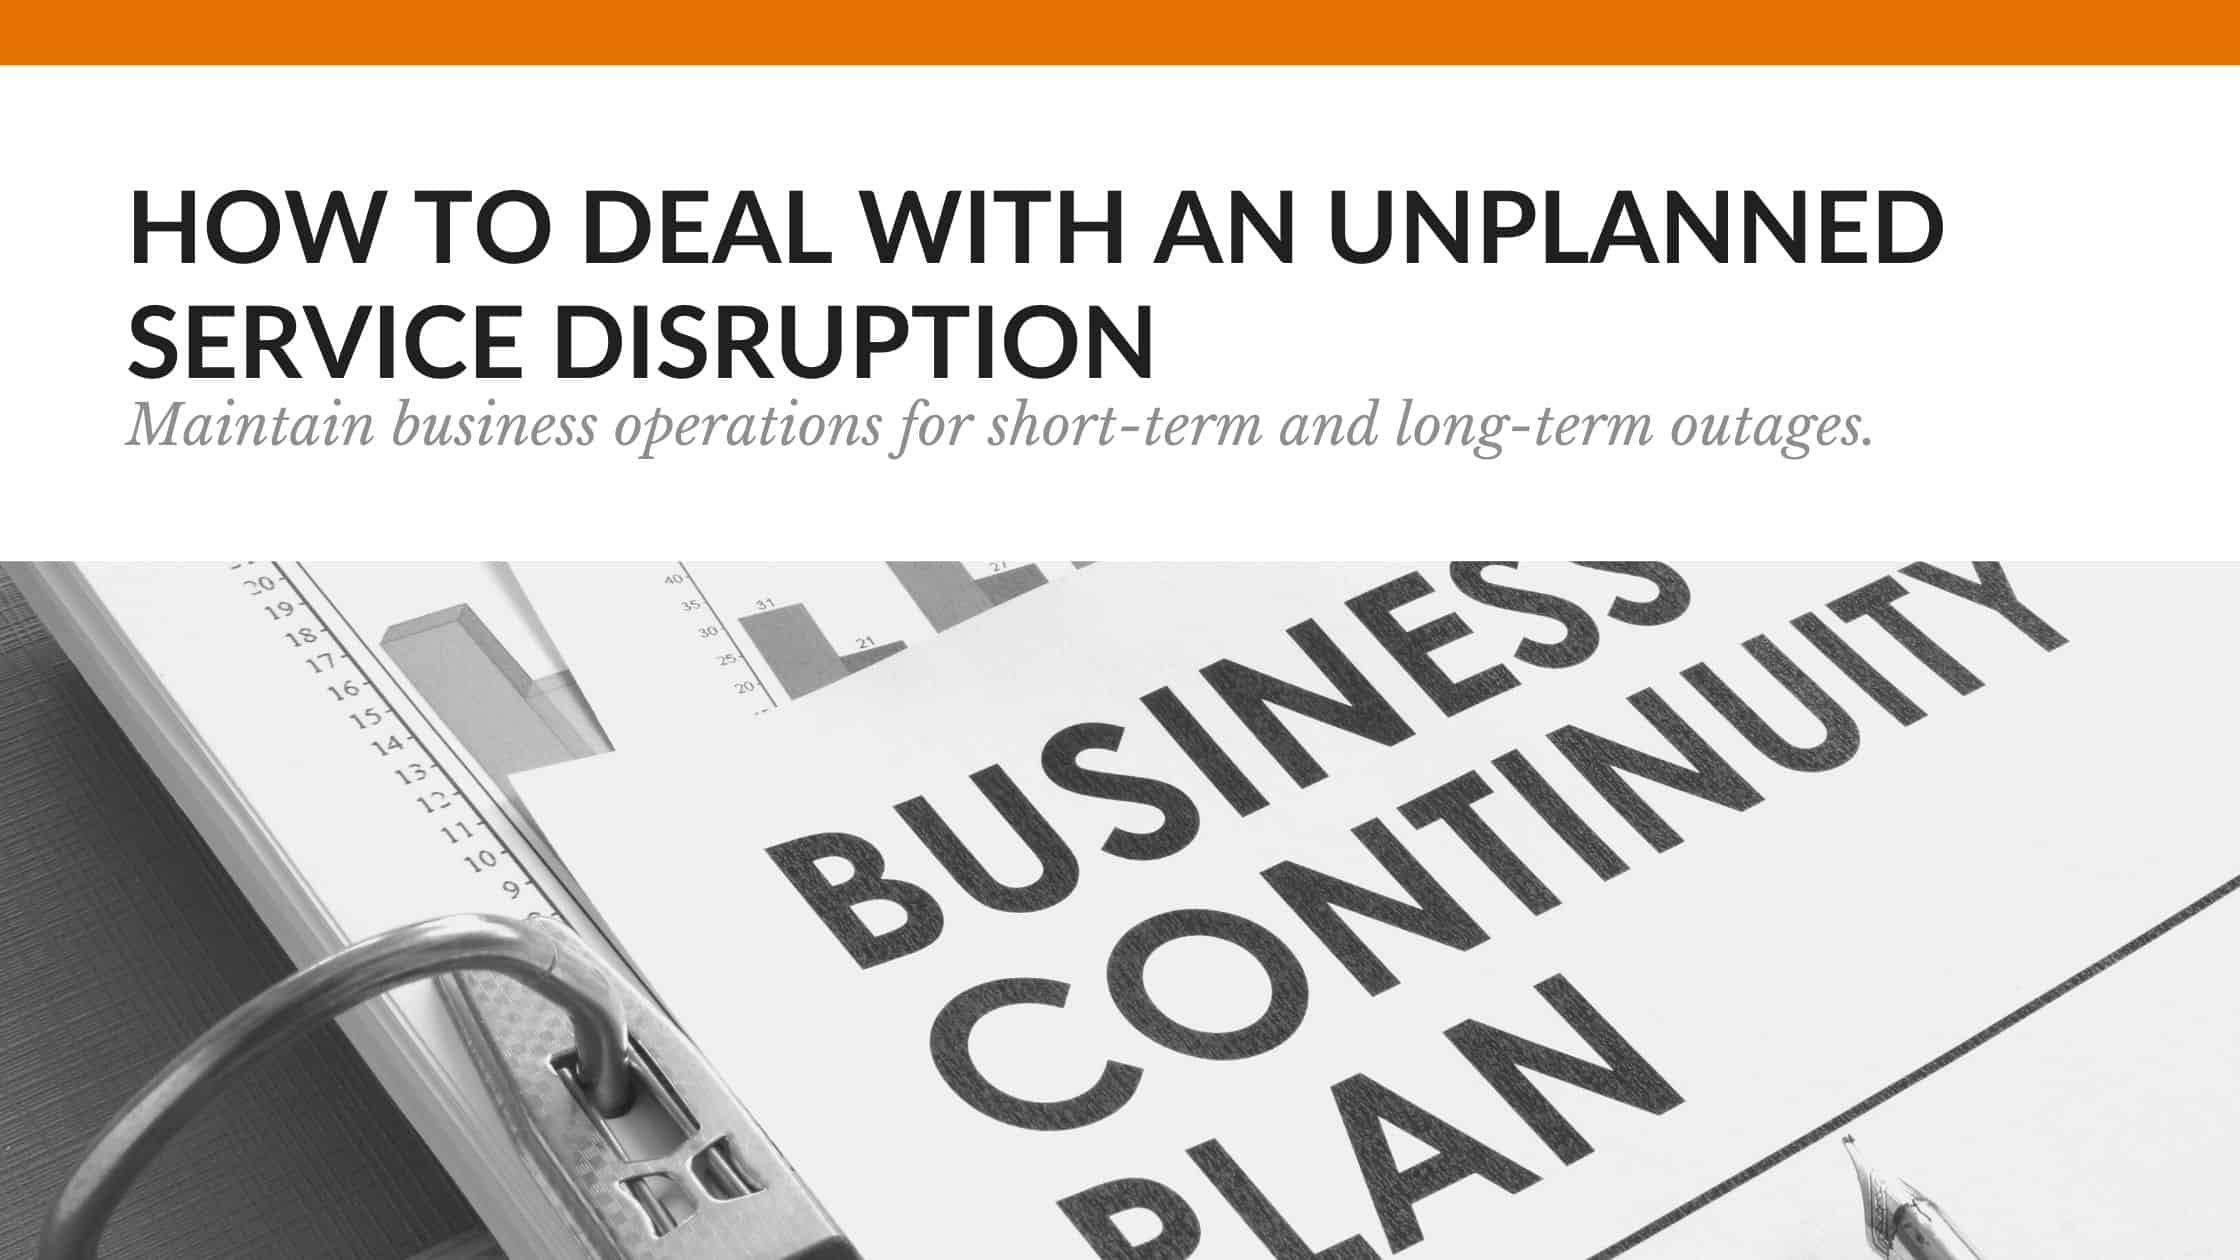 Business Continuity Plan - Why you need one and how to implement.